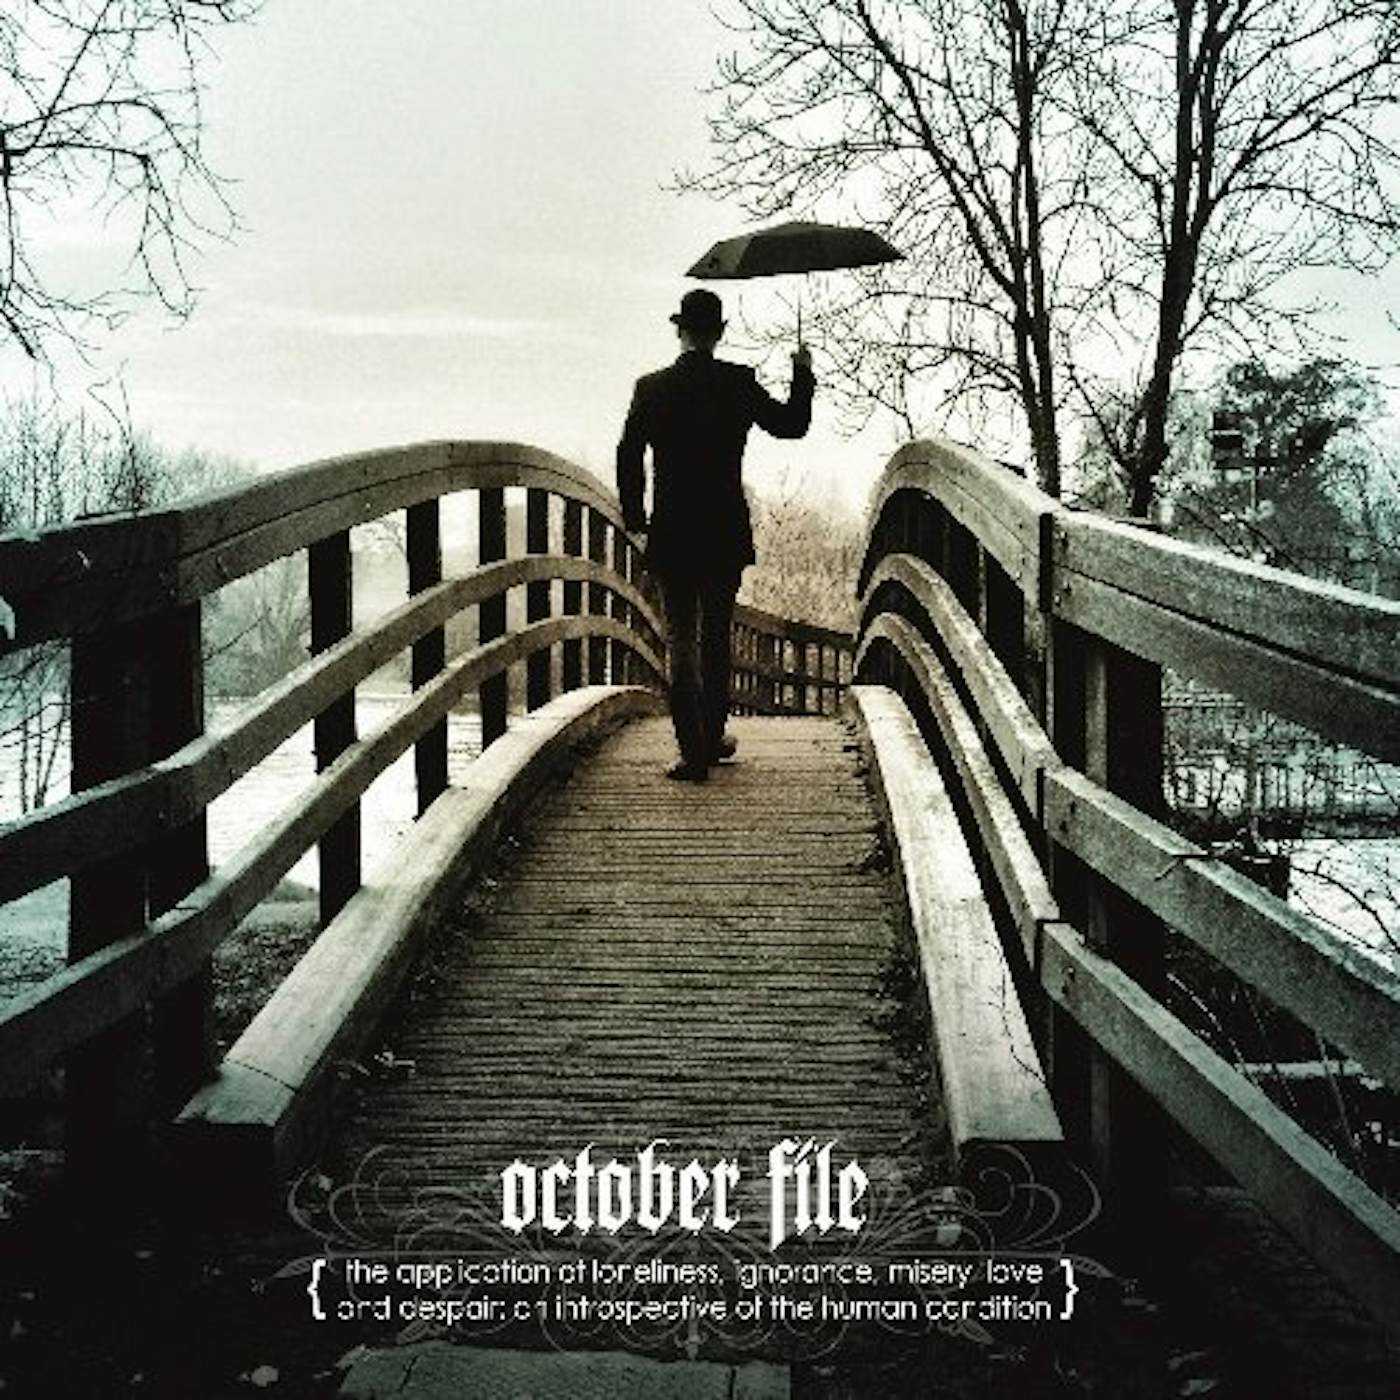 October File APPLICATION OF LONELINESS IGNORANCE MISERY LOVE & Vinyl Record